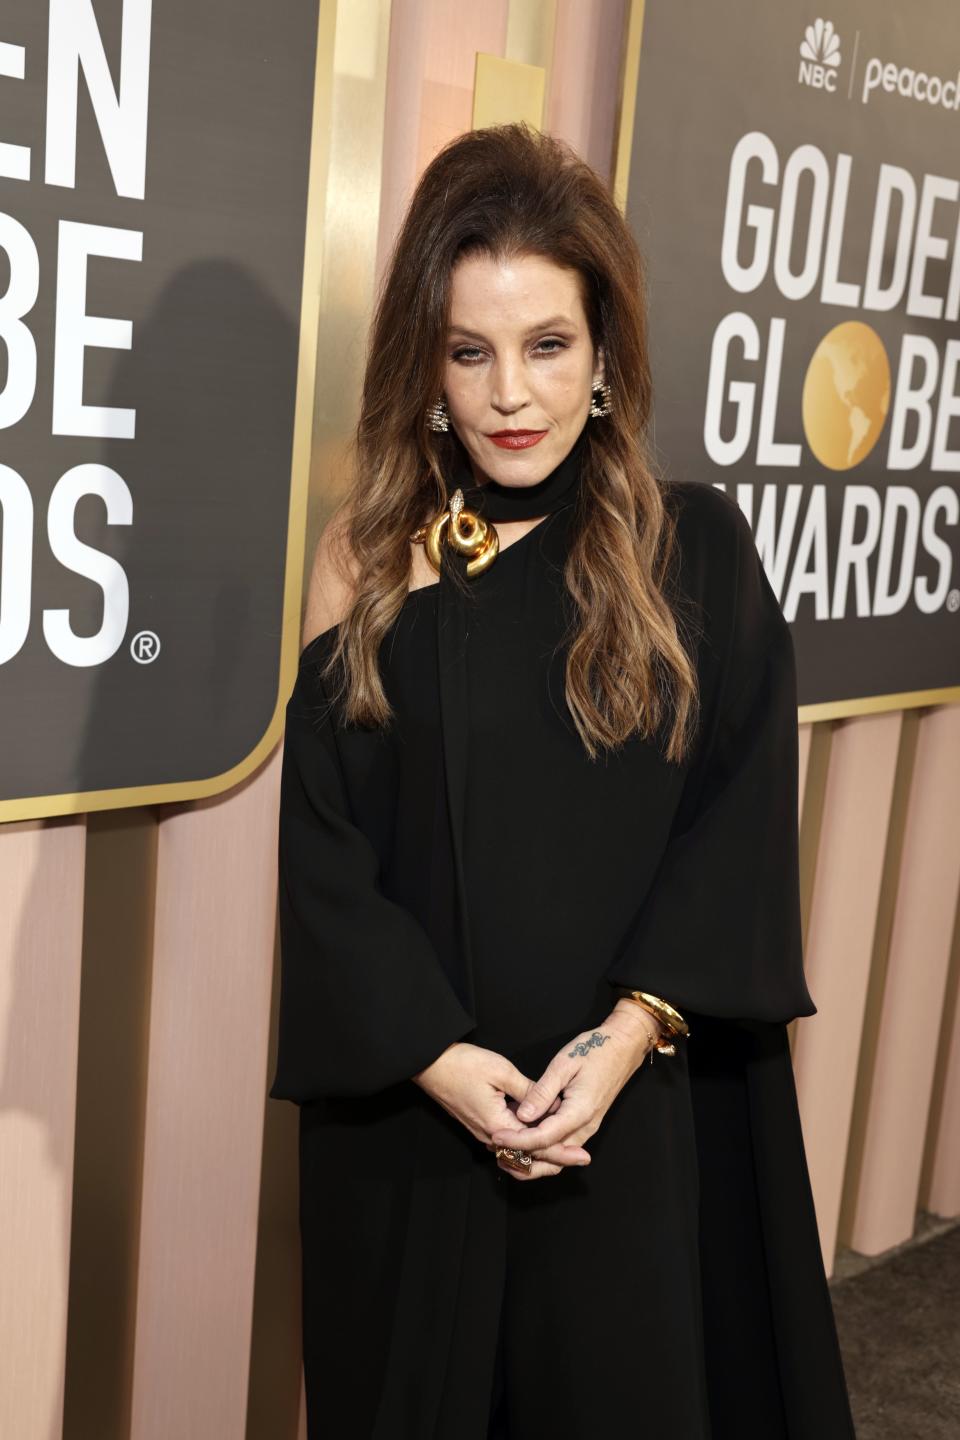 Lisa Marie Presley at the Golden Globes in January 2023 wearing black.